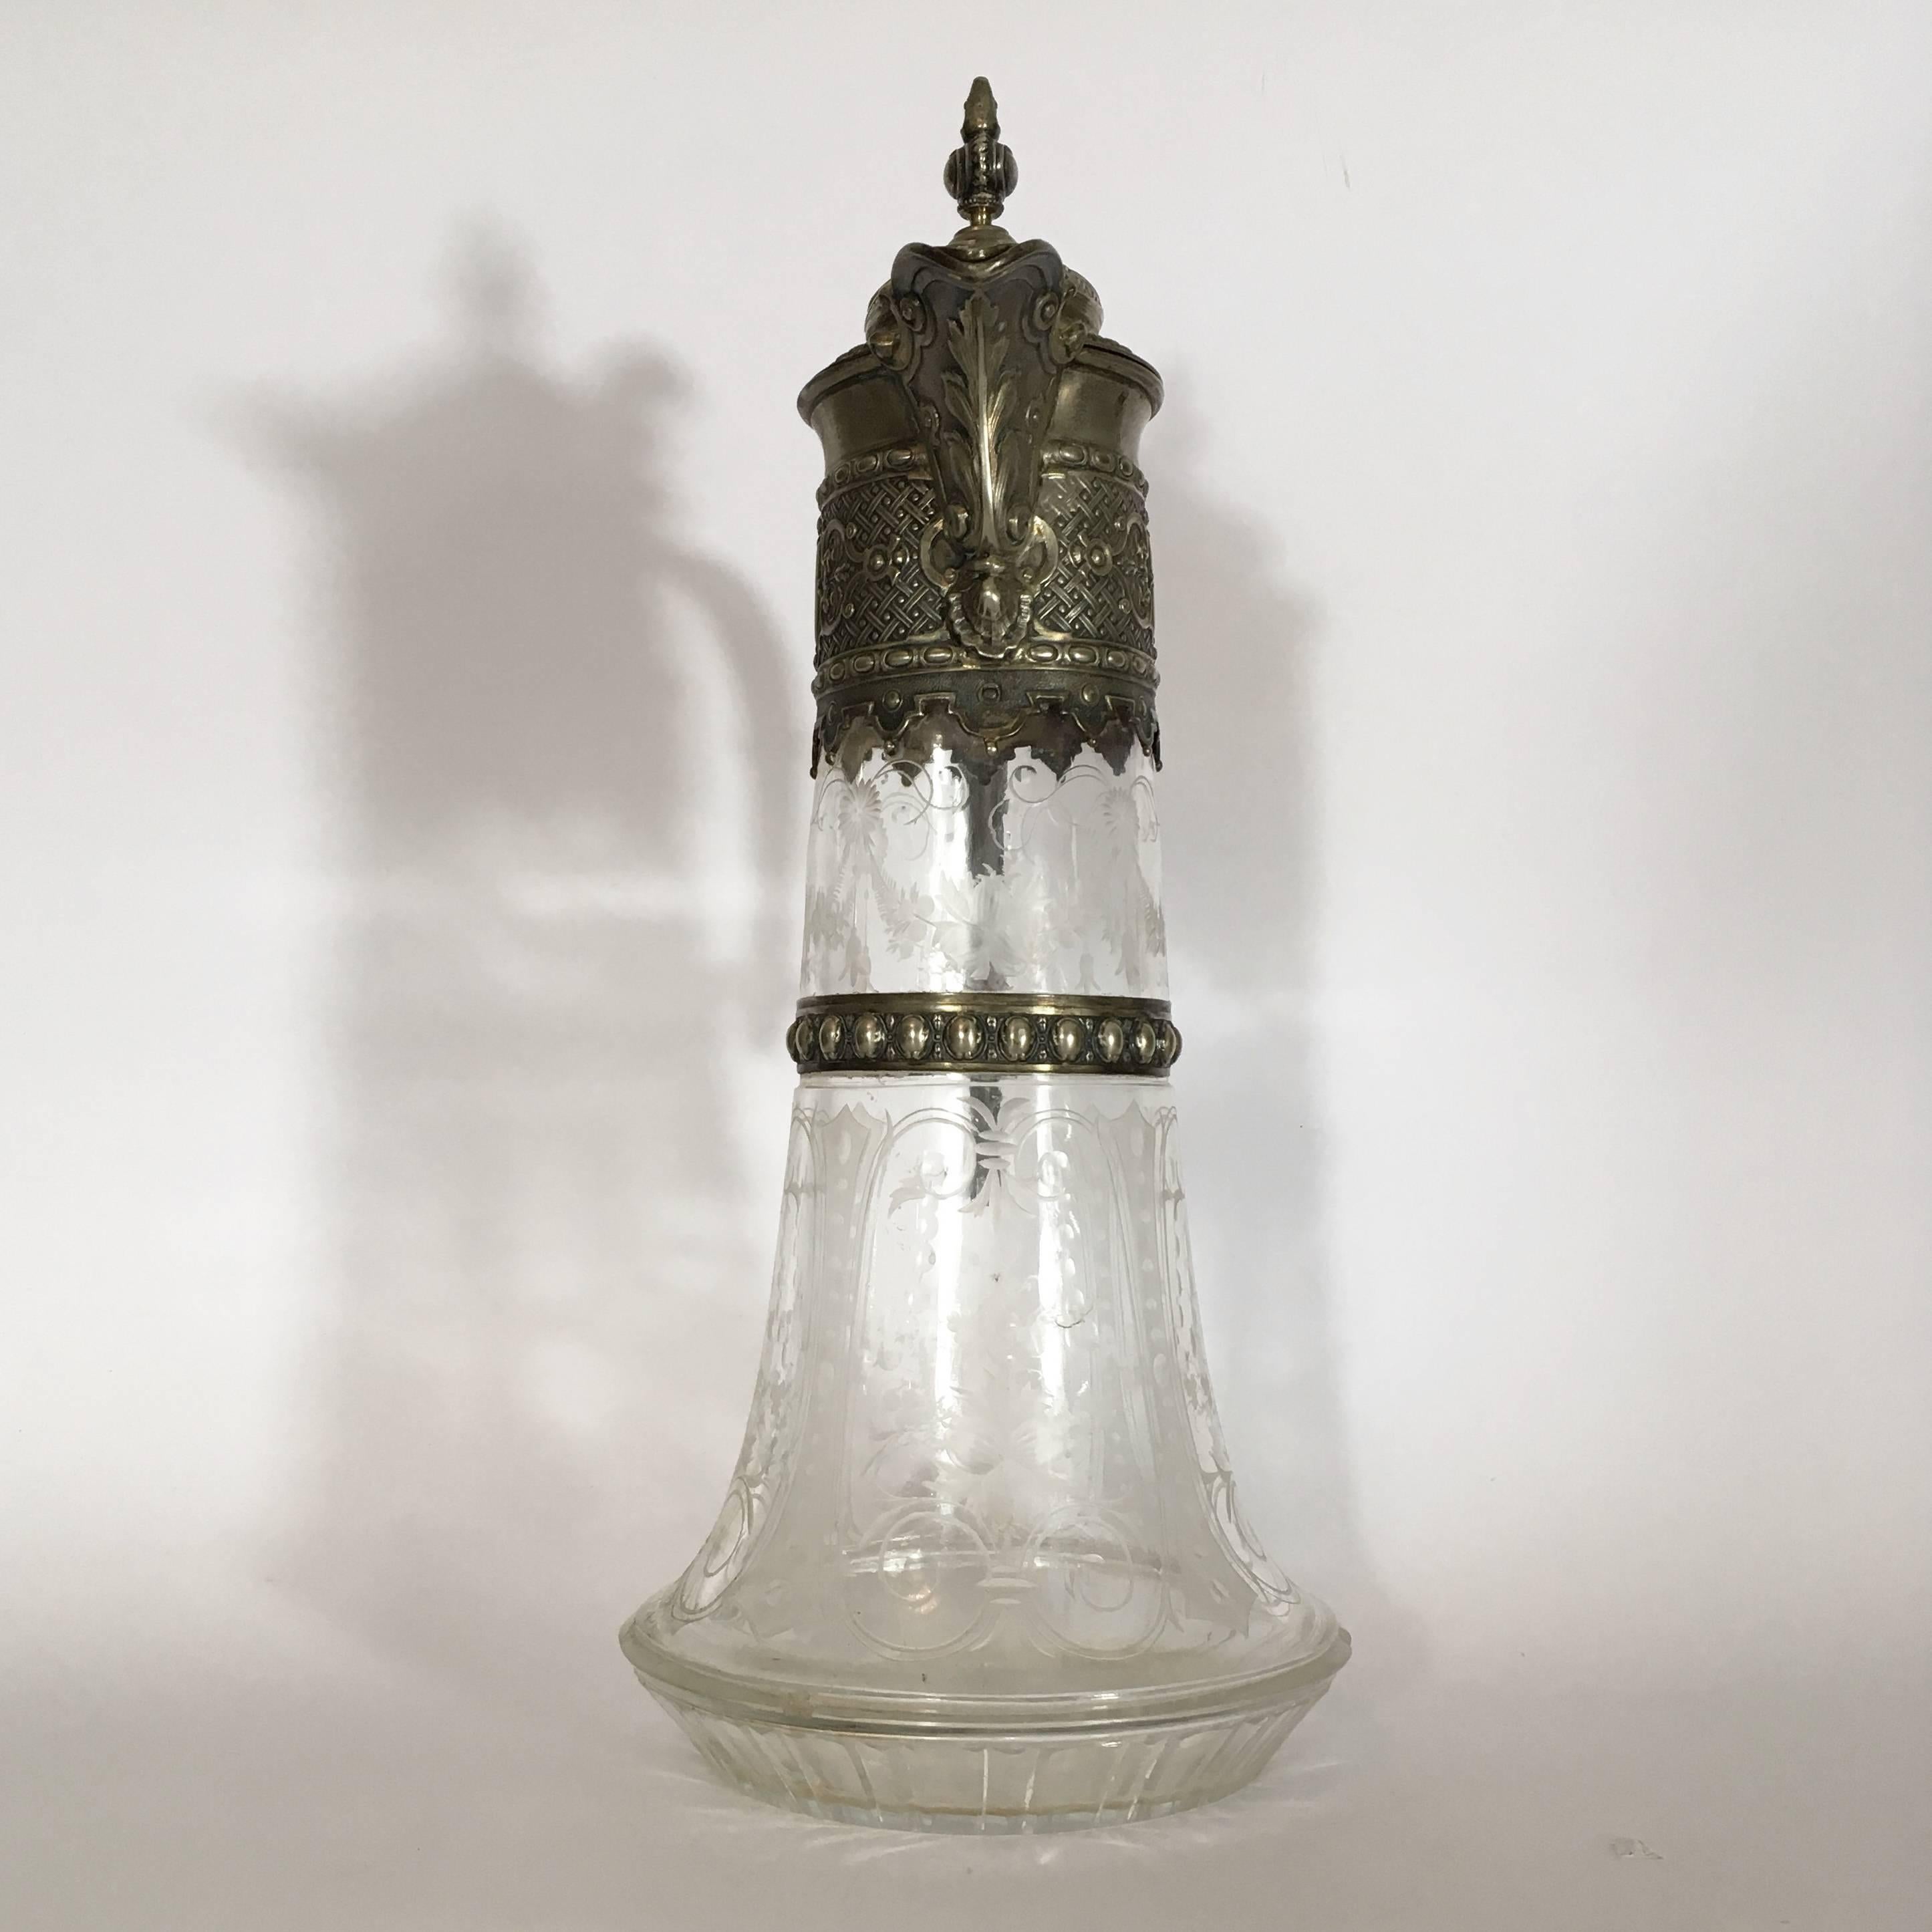 Art Nouveau Italian Late 19th Century Engraved Glass Decanter or Carafe with Mountings For Sale